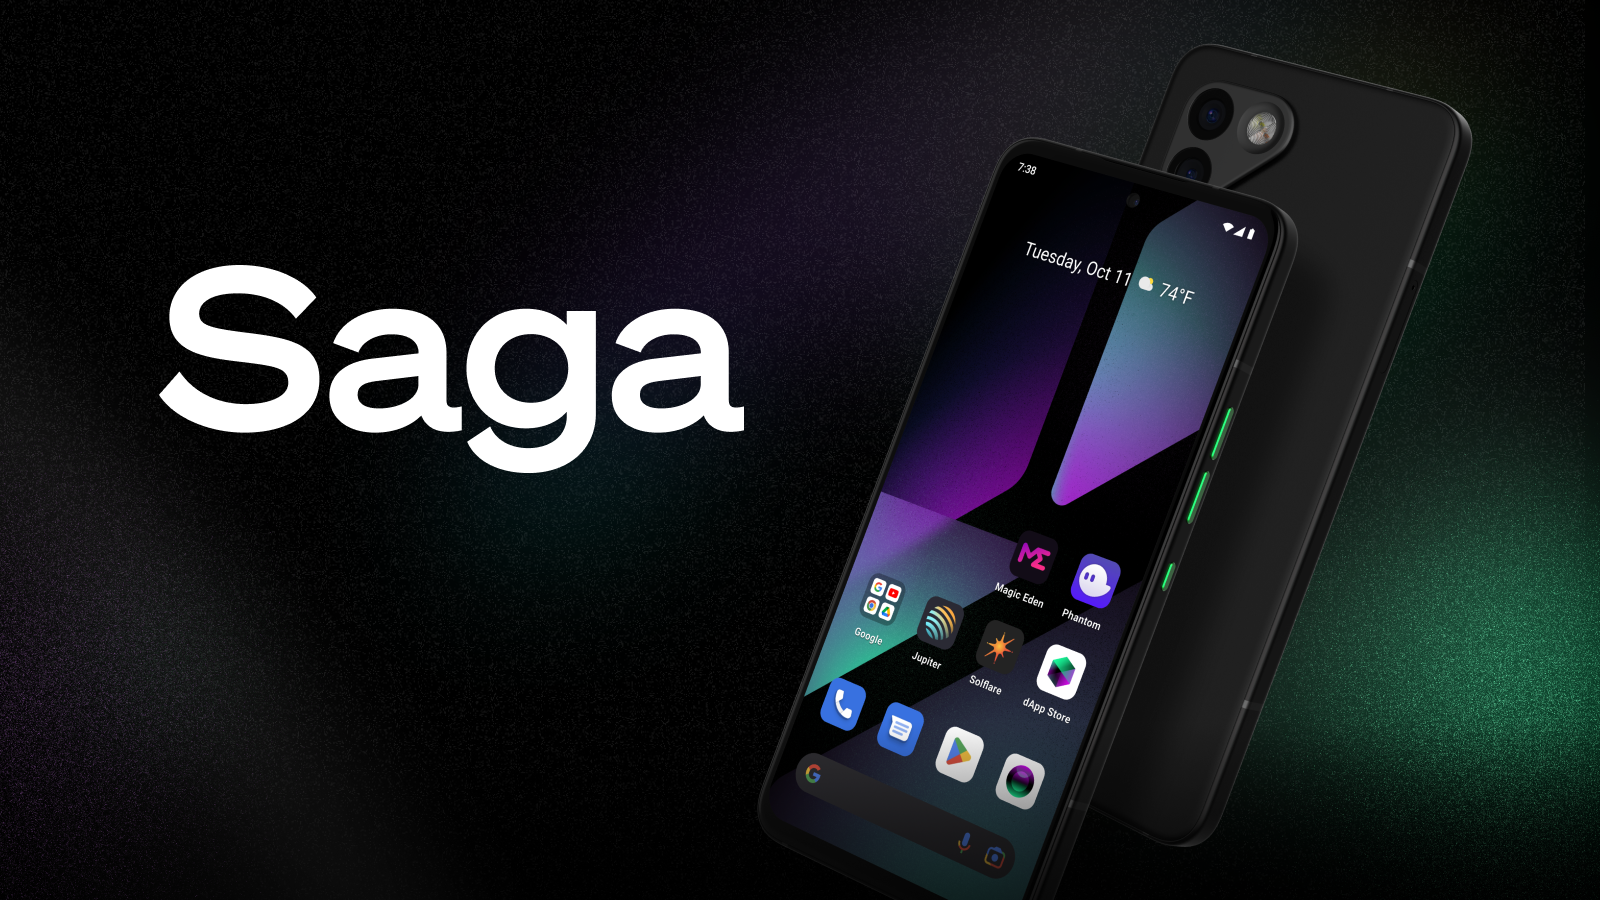 Solana Mobile launched its Saga phone last year at a price tag of $1,000. It later cut its price to $599. Factoring in BONK changed all that.